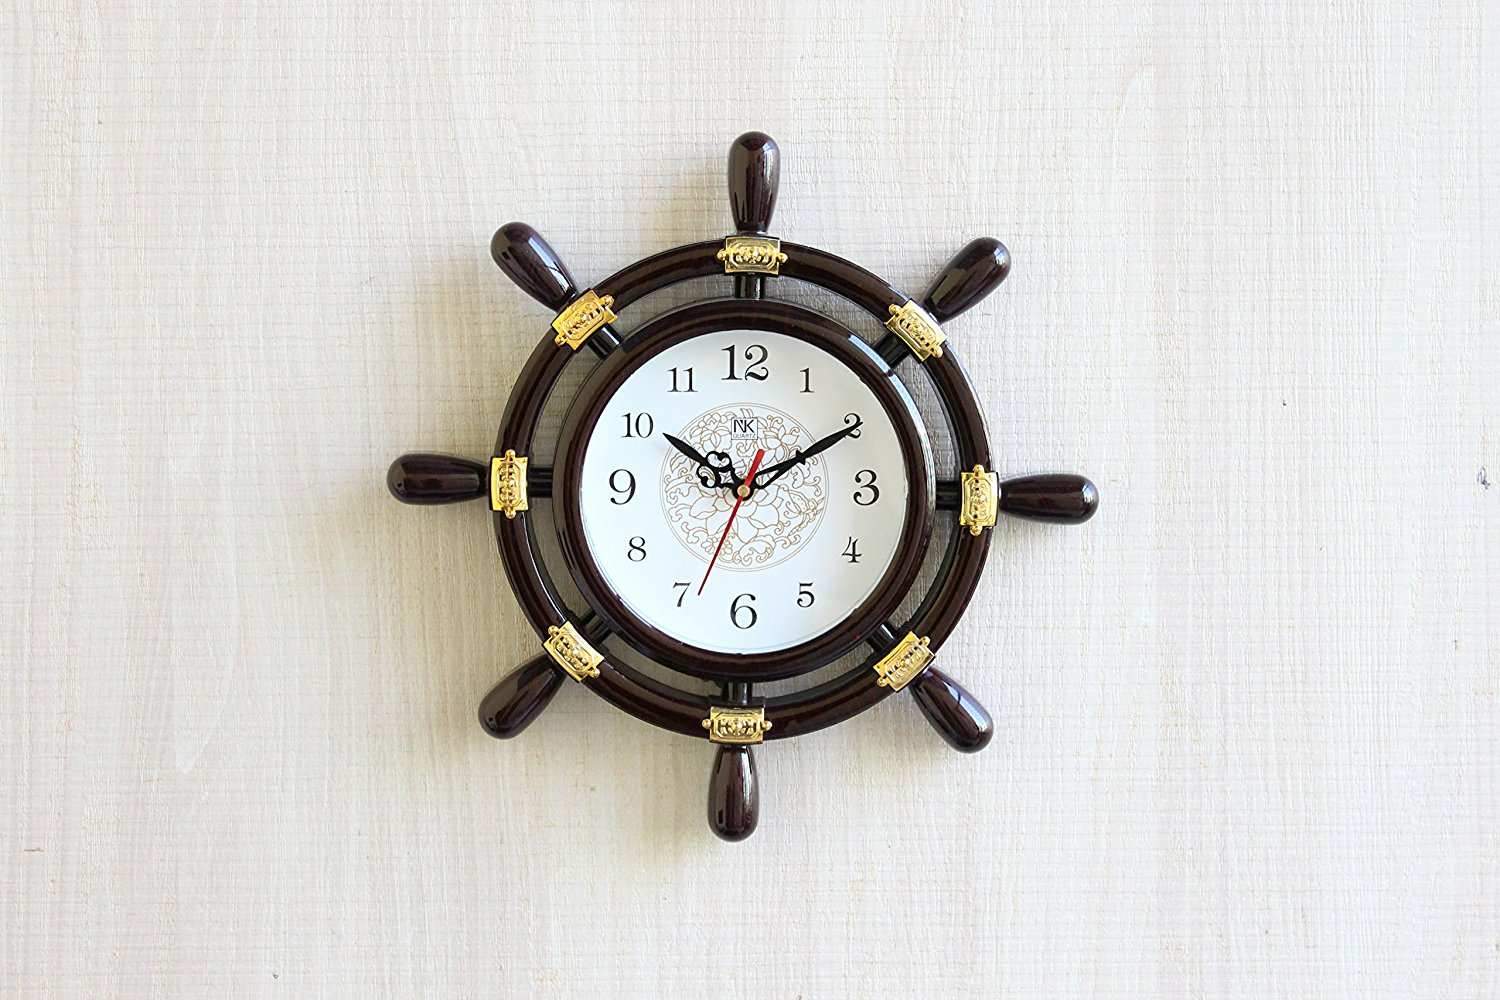 FunkyTradition Decorative Antique Retro Round Ship Steering Shape Plastic Pendulum Wall Clock for Home Office Decor and Gifts 40 CM Tall